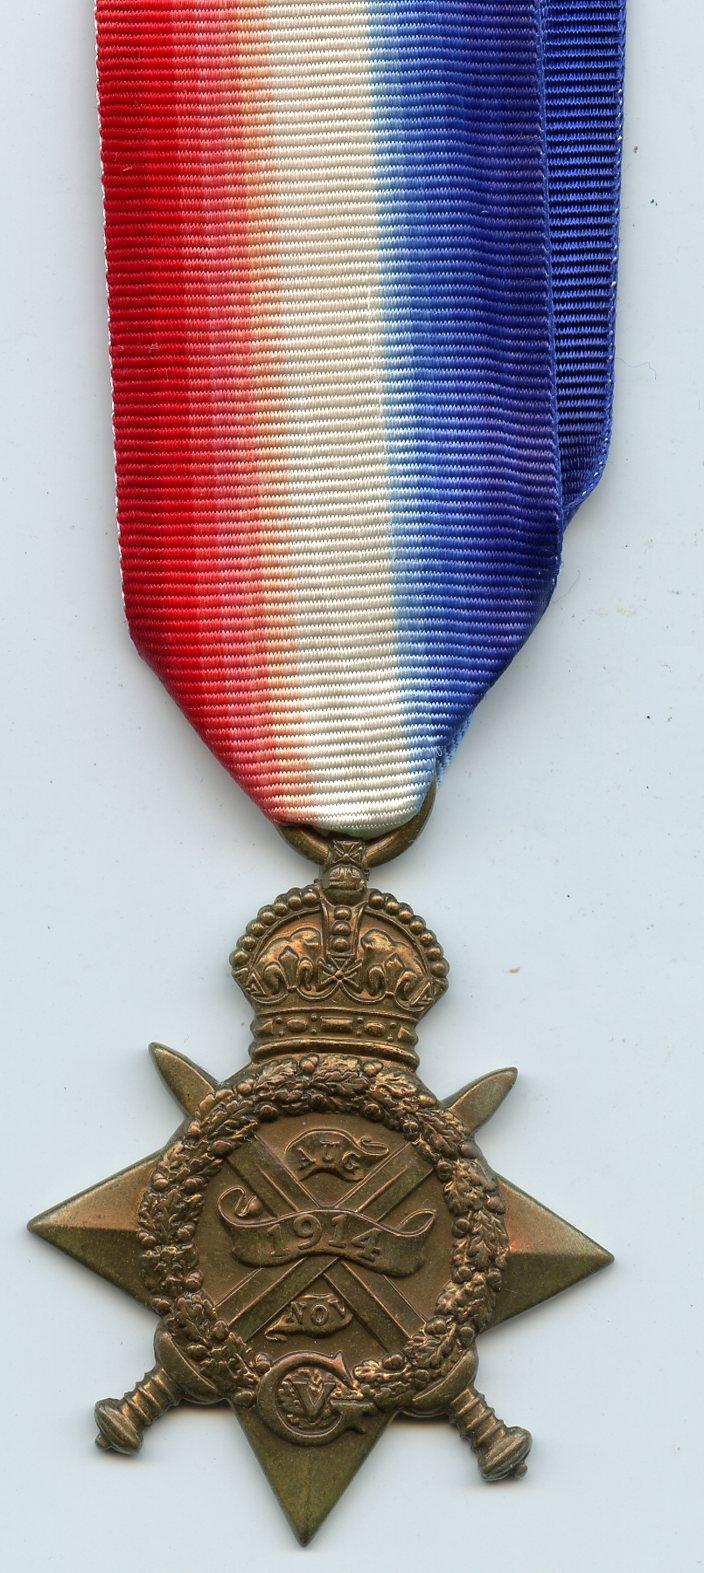 1914 Mons Star  Medal To Pte Andrew King, 1st Battalion Cameronians (Scottish Rifles)